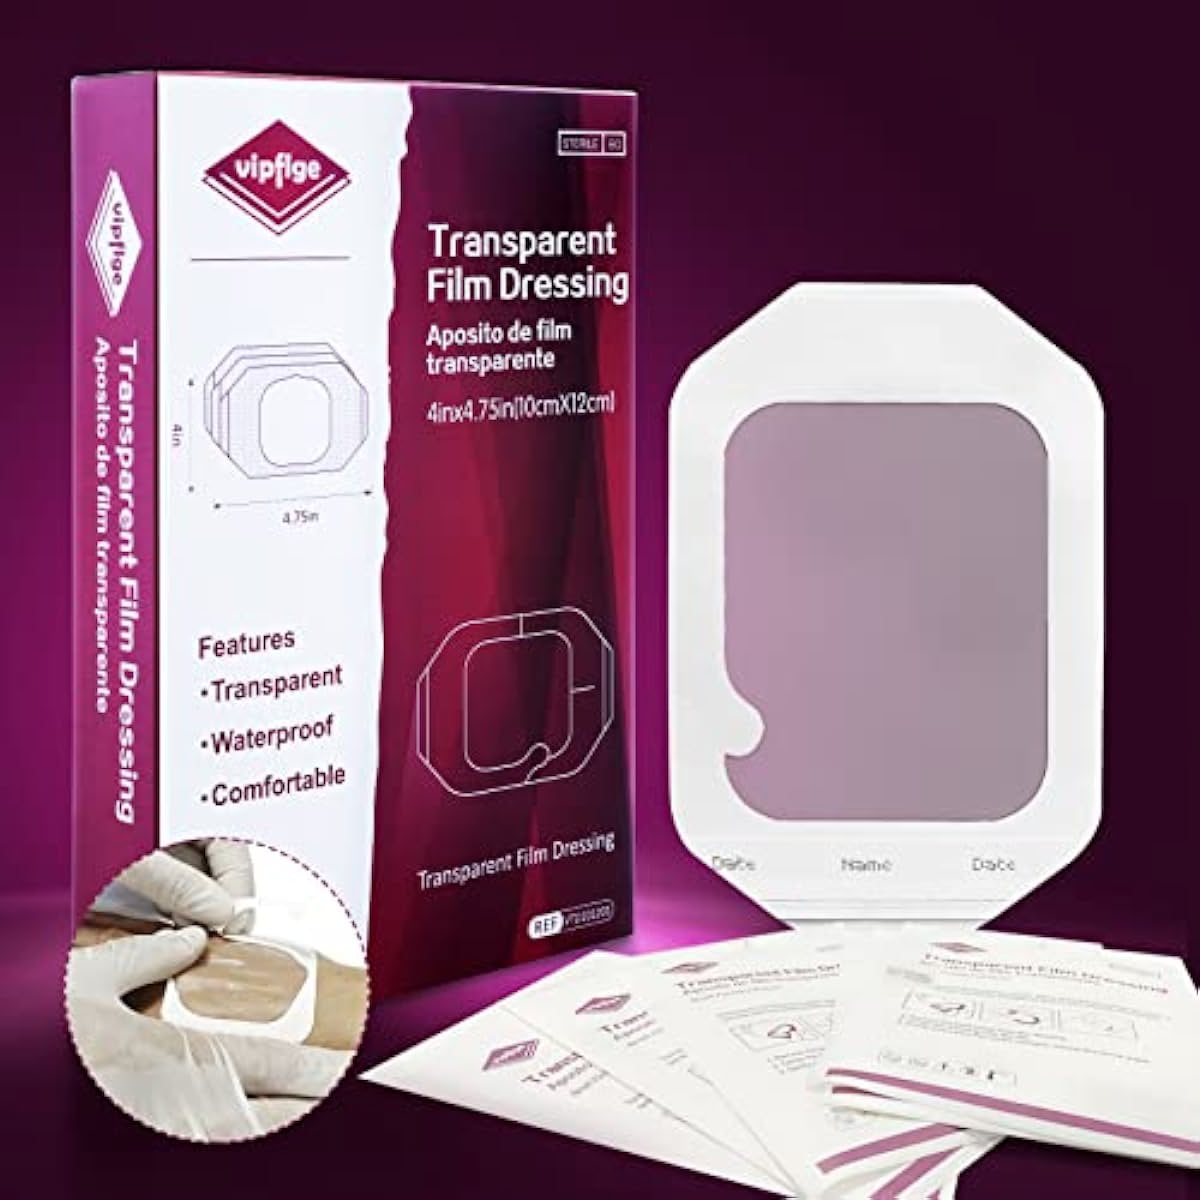 Transparent Film Dressing 4\'\' x 4.75\'\' - 50 Pack, Waterproof Transparent Wound Bandage, Adhesive Patch, Post Surgical Shower or IV Shield, Tattoo Aftercare Bandage